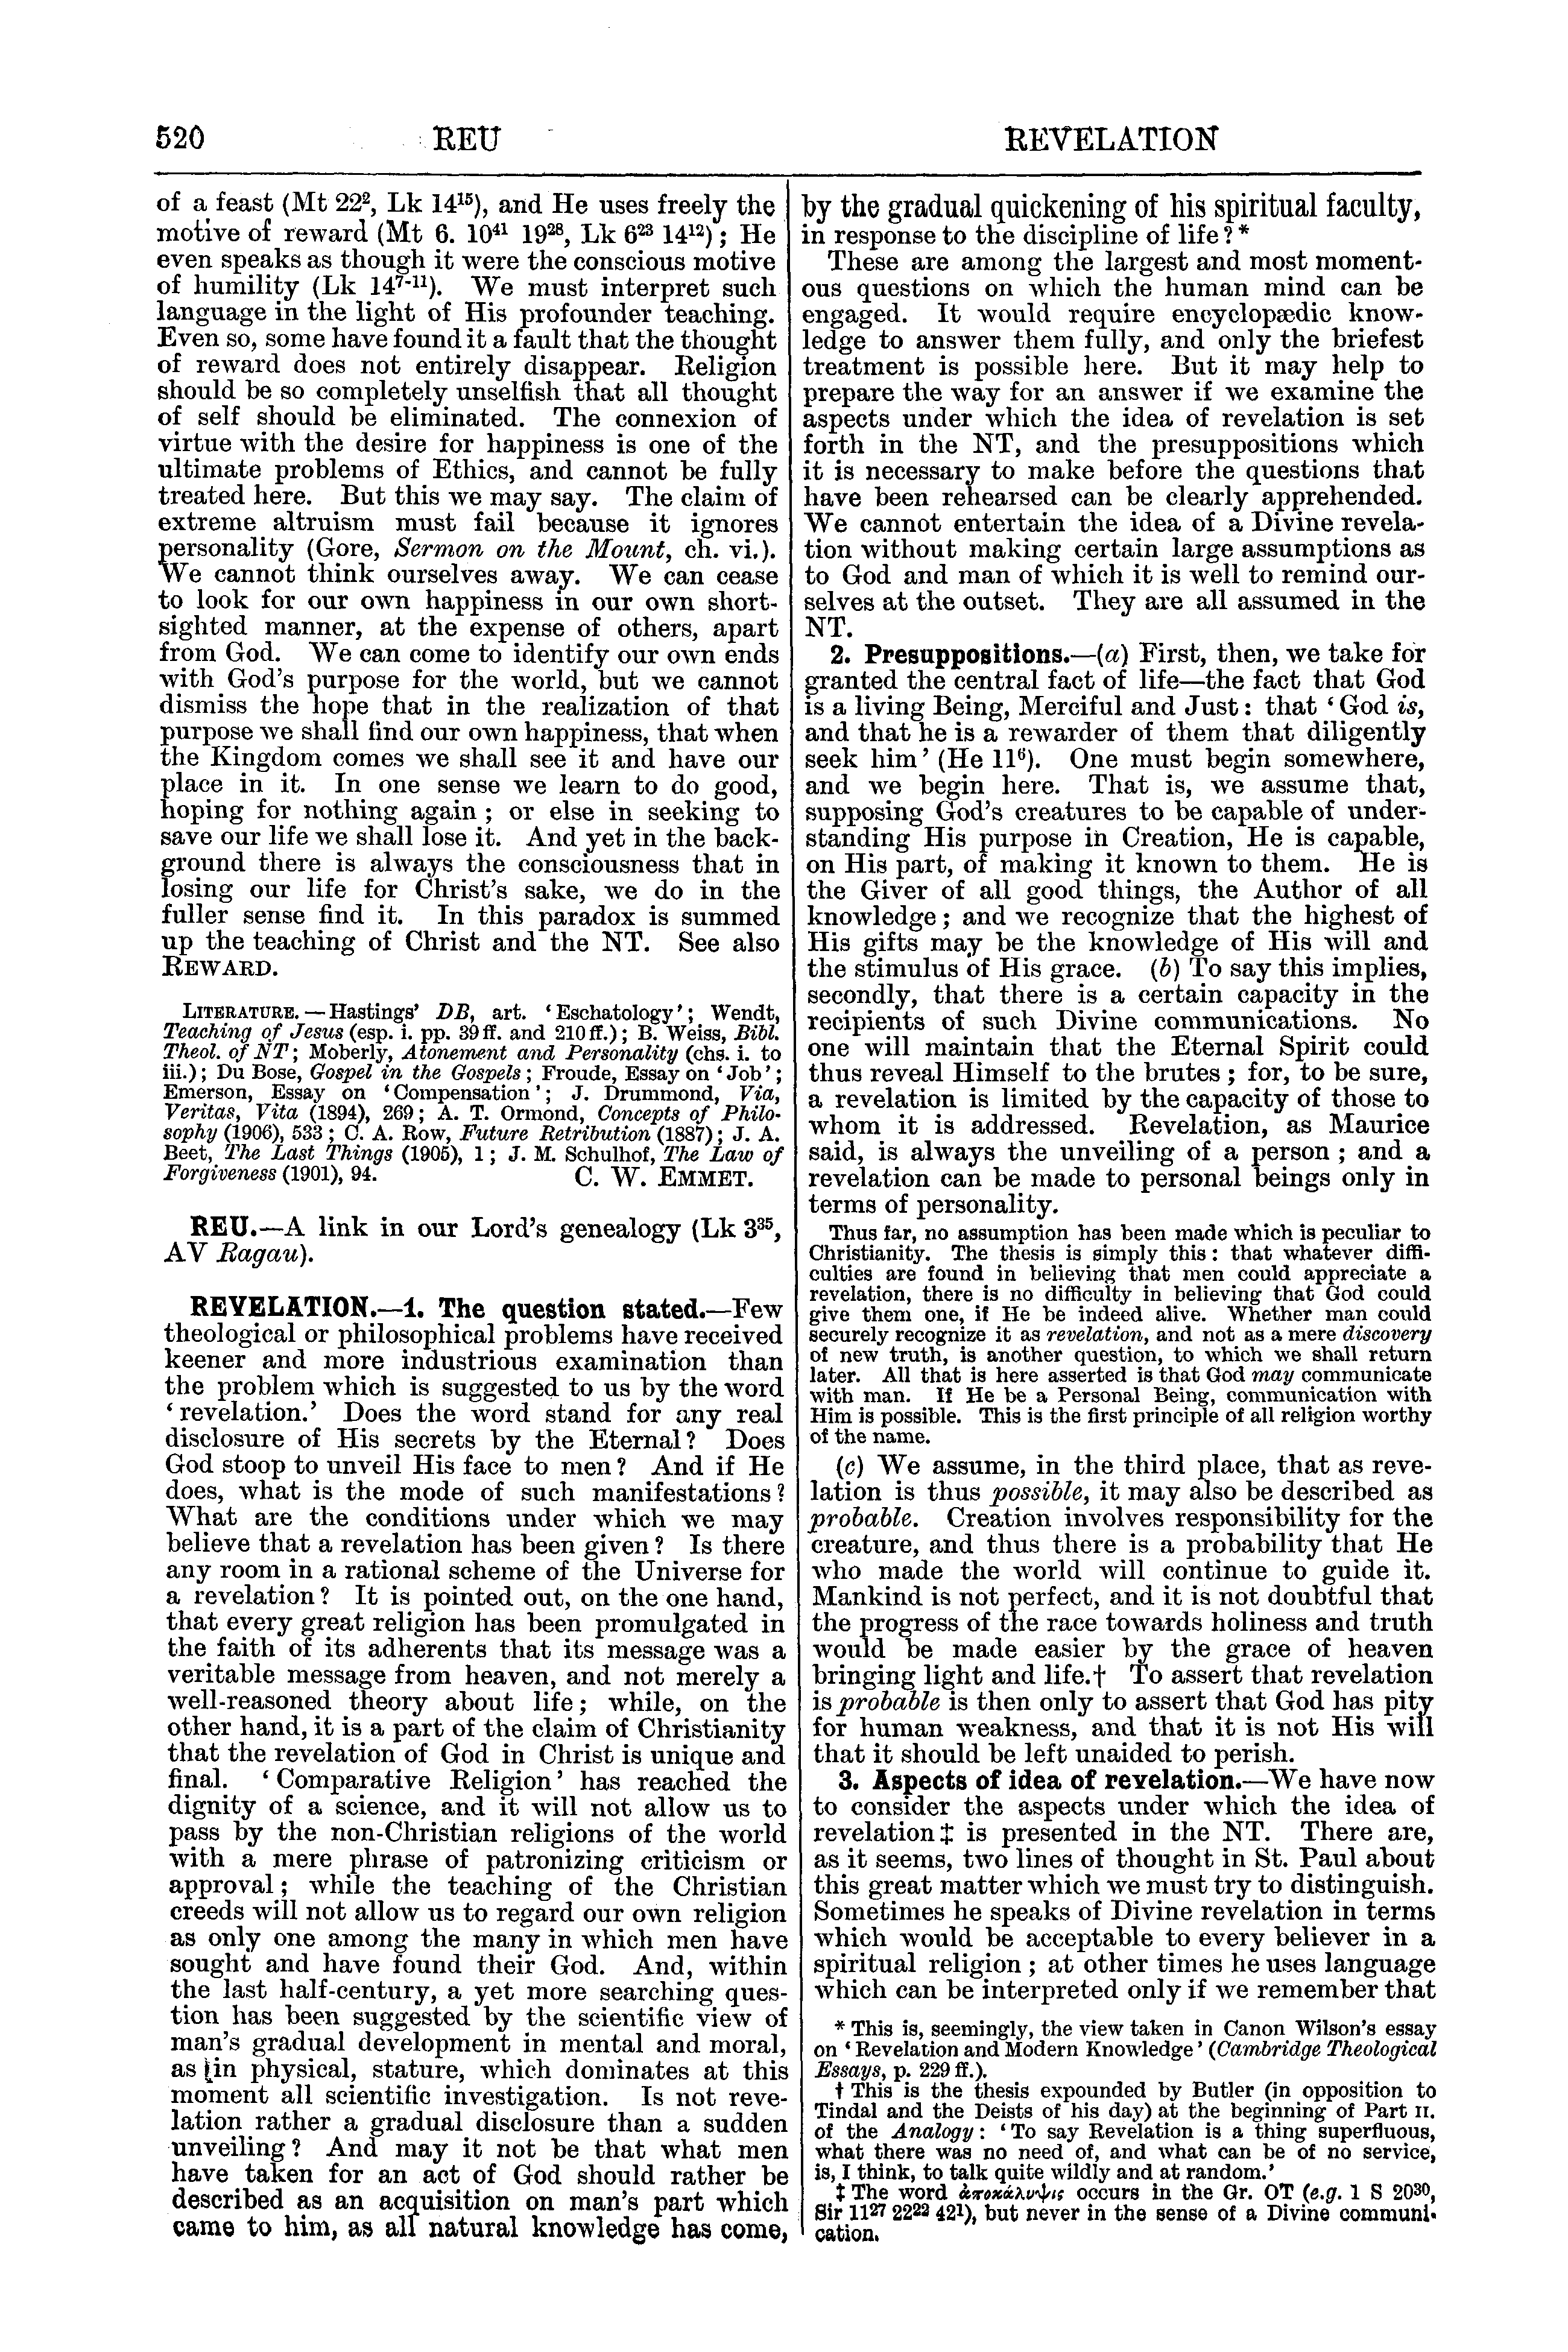 Image of page 520